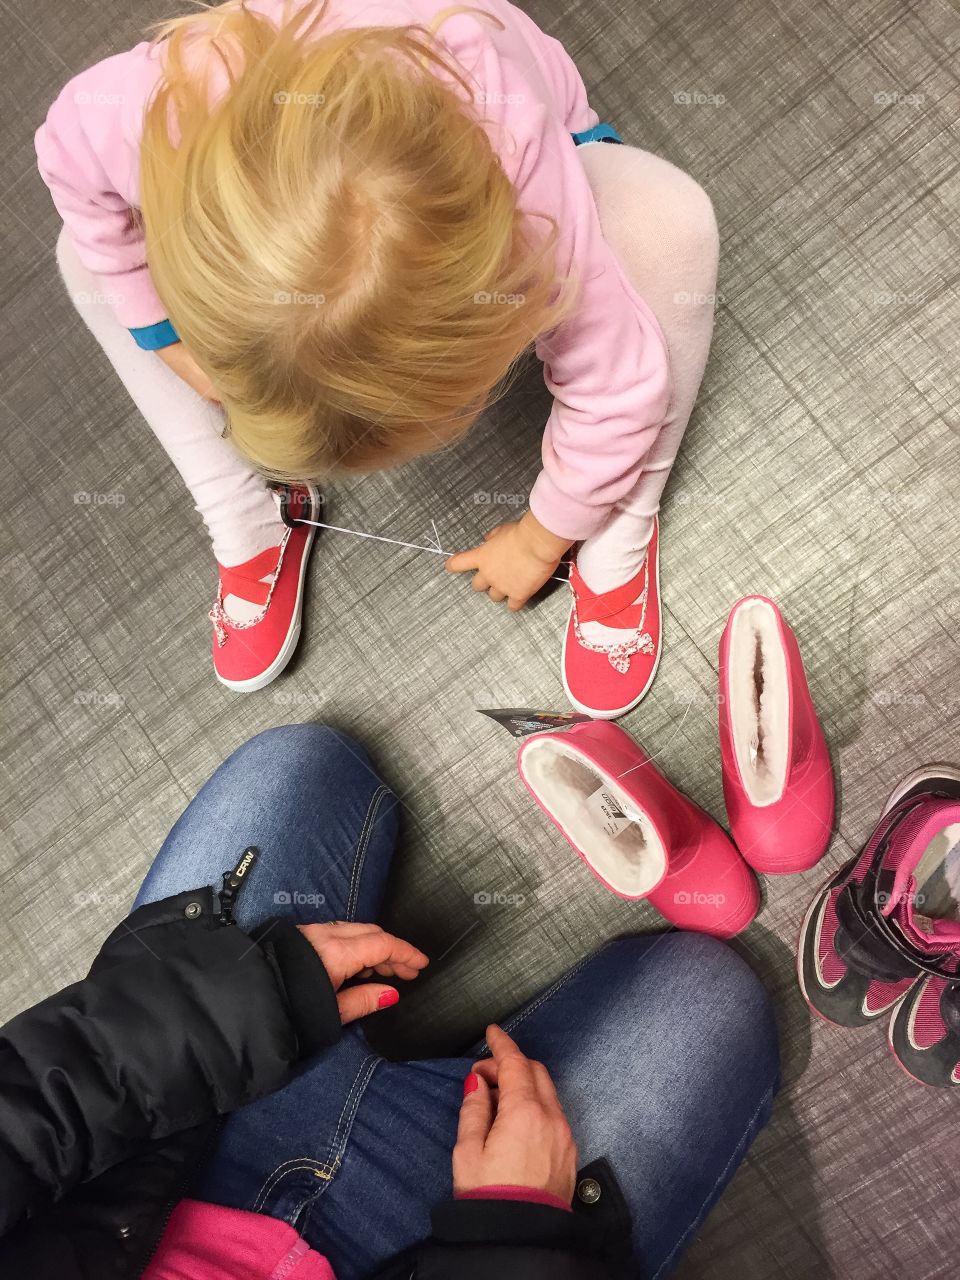 Testing shoes with kids in shoestore.